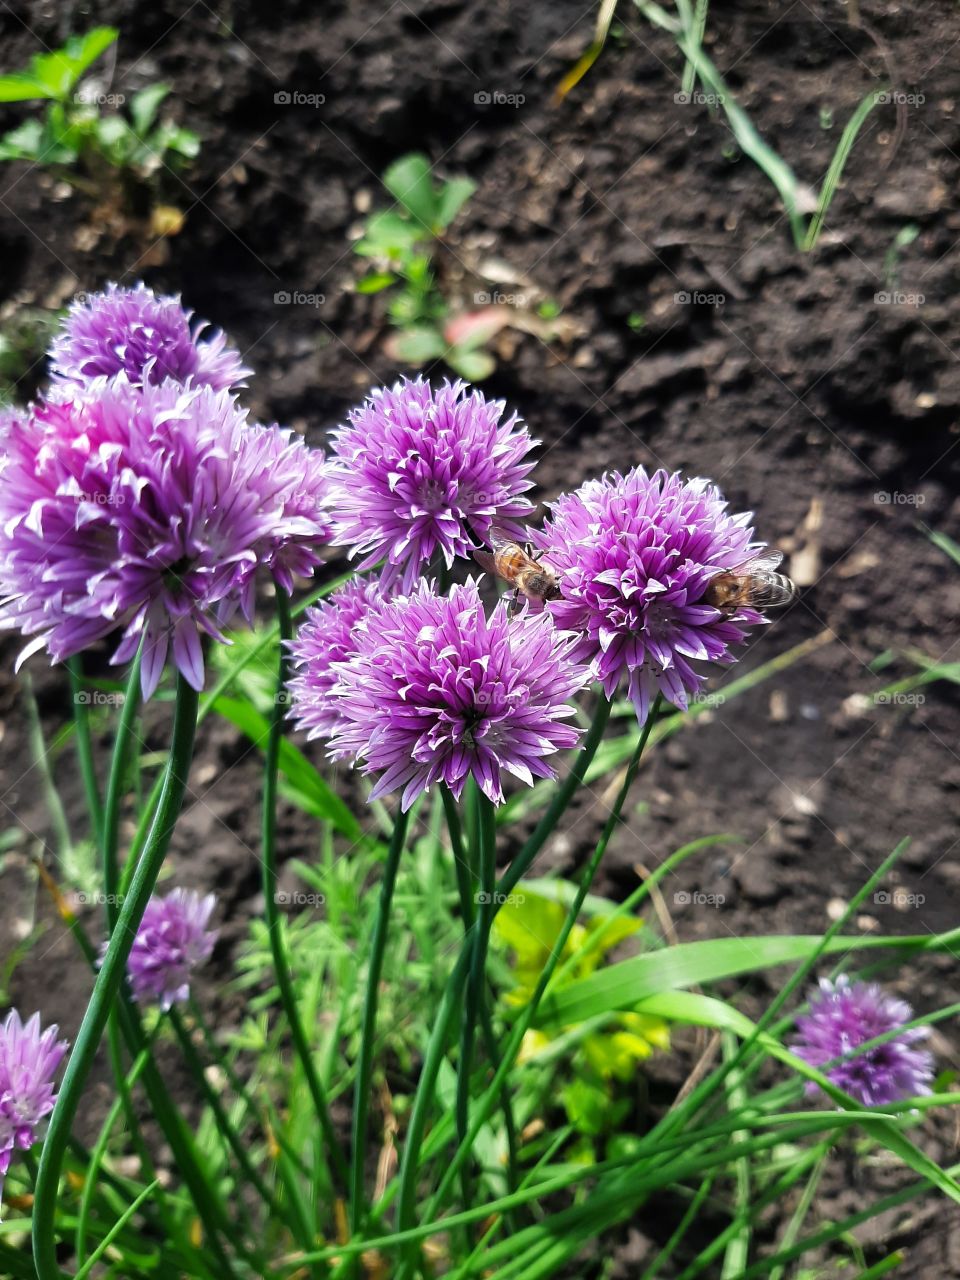 Shallots bloom and smell, thus attracting bees.